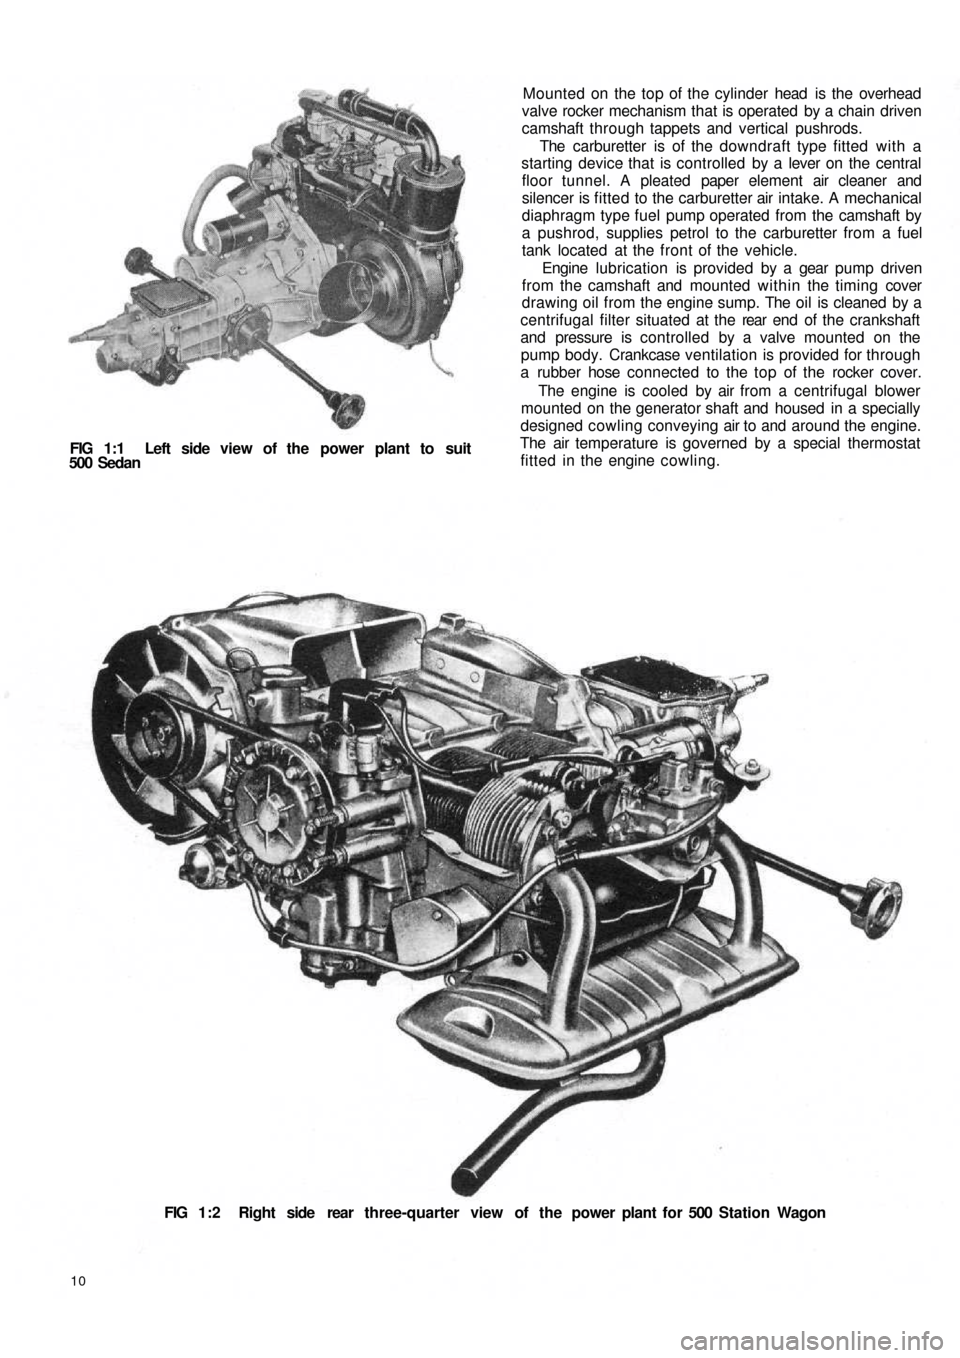 FIAT 500 1958 1.G Workshop Manual FIG 1:1  Left side view of the power plant to suit
500  Sedan
10
FIG 1:2  Right side  rear  three-quarter view of the power plant for 500 Station  Wagon Mounted on the top of the cylinder  head  is th